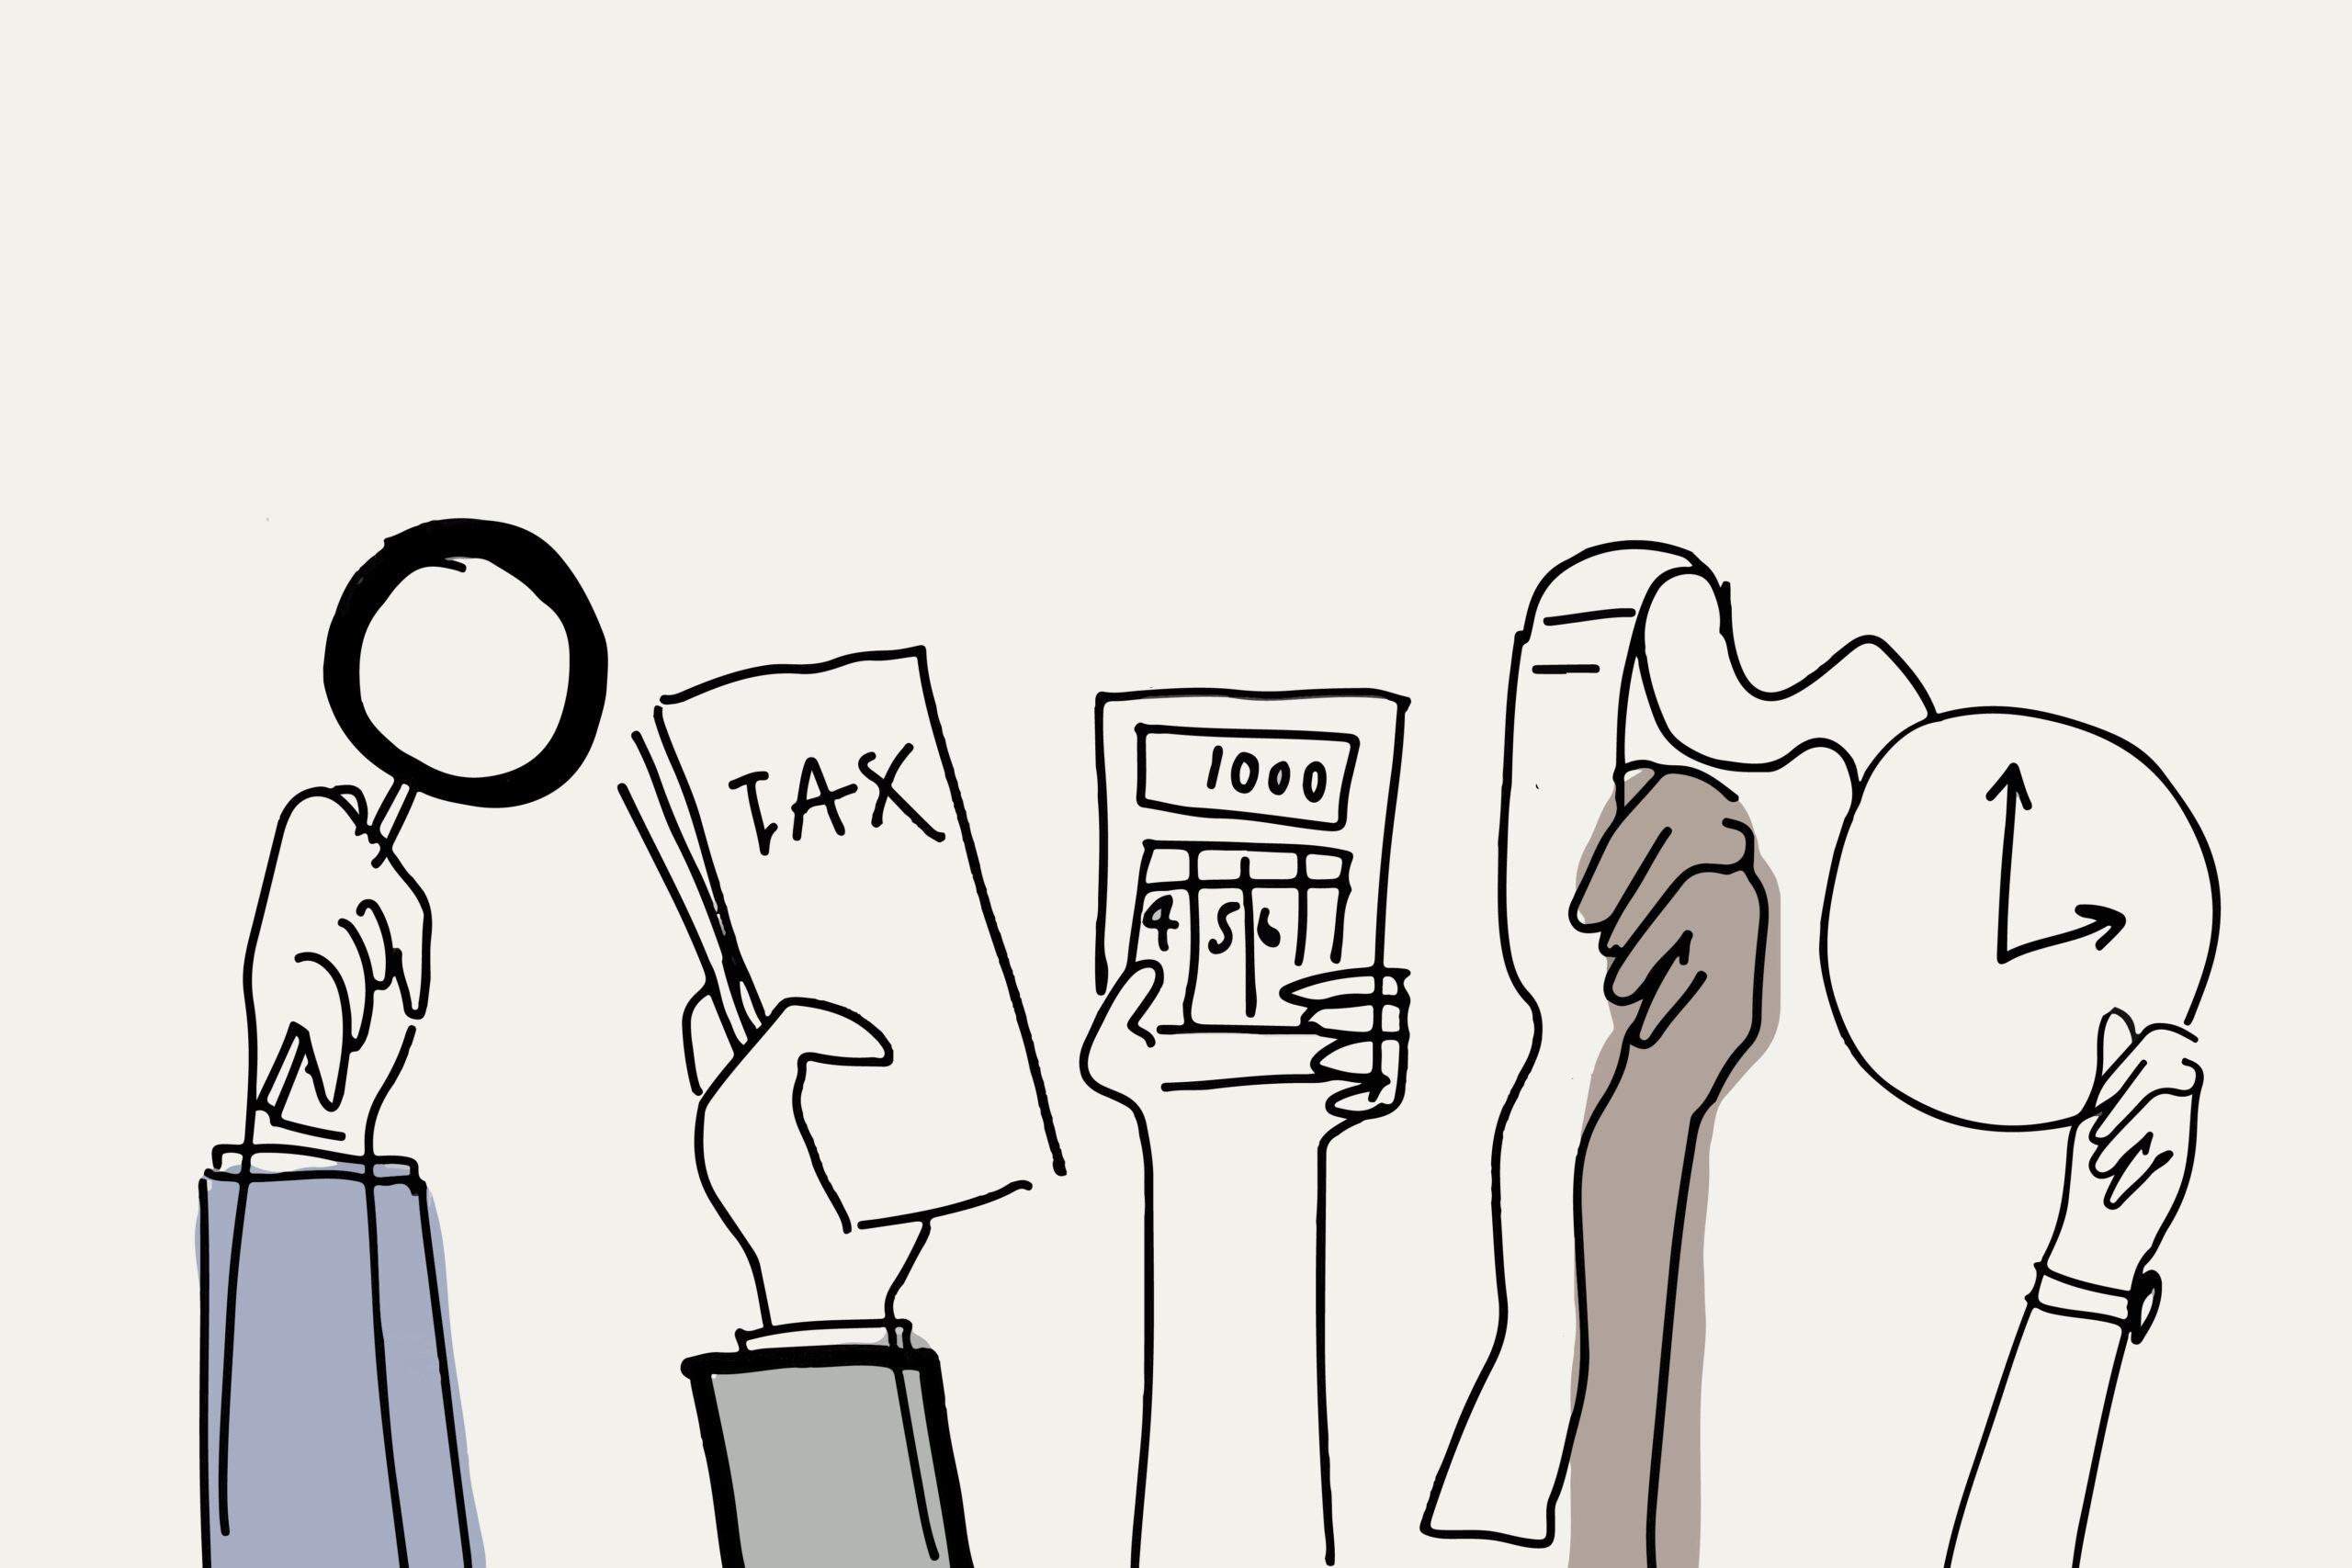 Illustration of four hands holding different financial tools and symbols. From left to right: a hand holding a magnifying glass, a hand holding a tax document, a hand holding a calculator displaying "1000," and a hand holding a long receipt. The hands represent various financial activities such as auditing, tax preparation, calculation, and record-keeping. The minimalistic, black-and-white design emphasizes the importance of these key financial tasks.